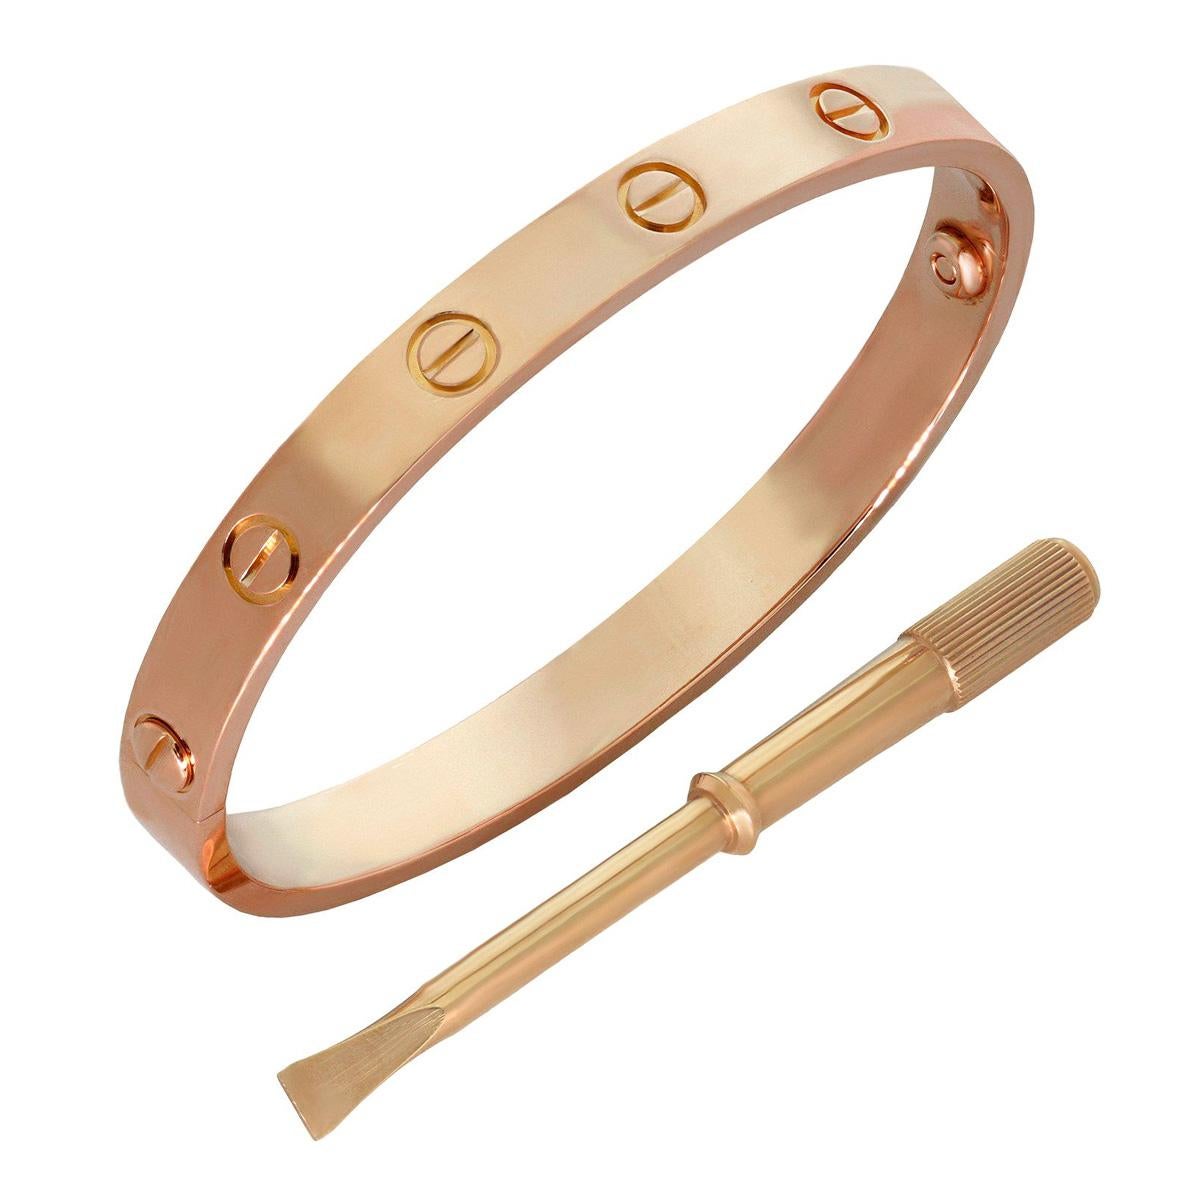 An iconic Cartier bangle bracelet from the love collection crafted in 18k rose gold. The bracelet measures 16cm (6.28